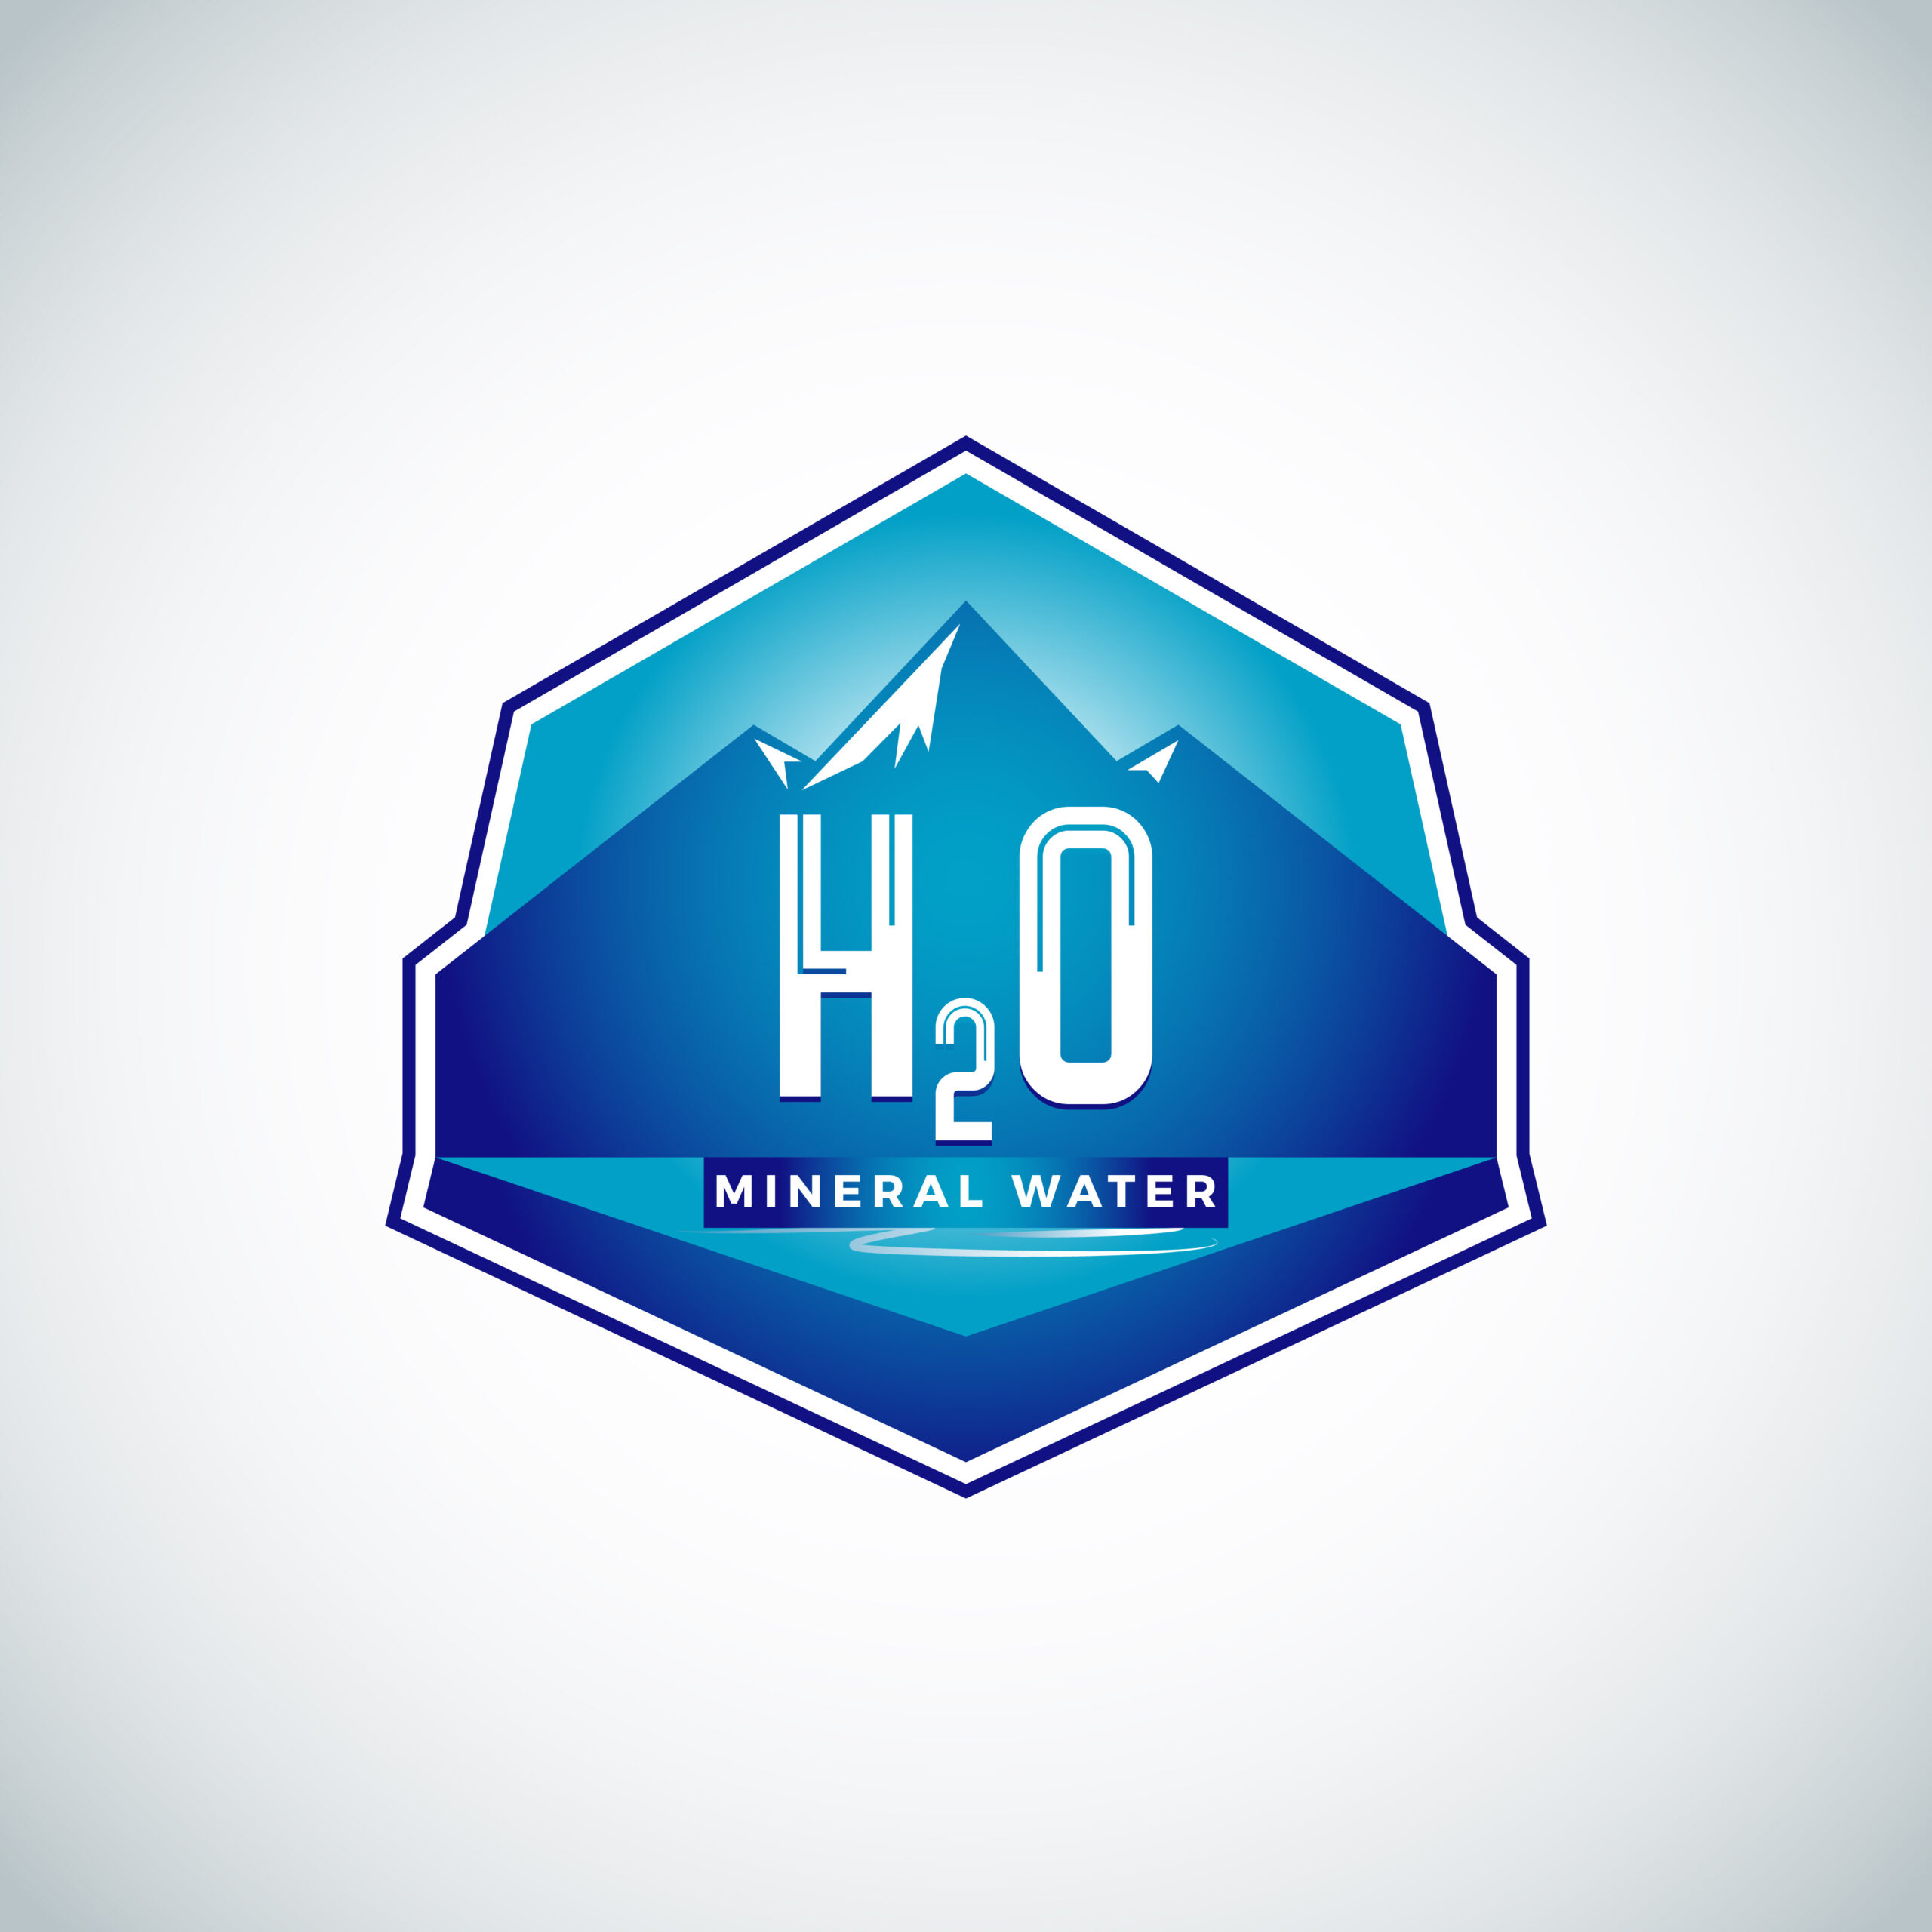 Water Label With Mountains – Download Free Vectors, Clipart With Mineral Water Label Template